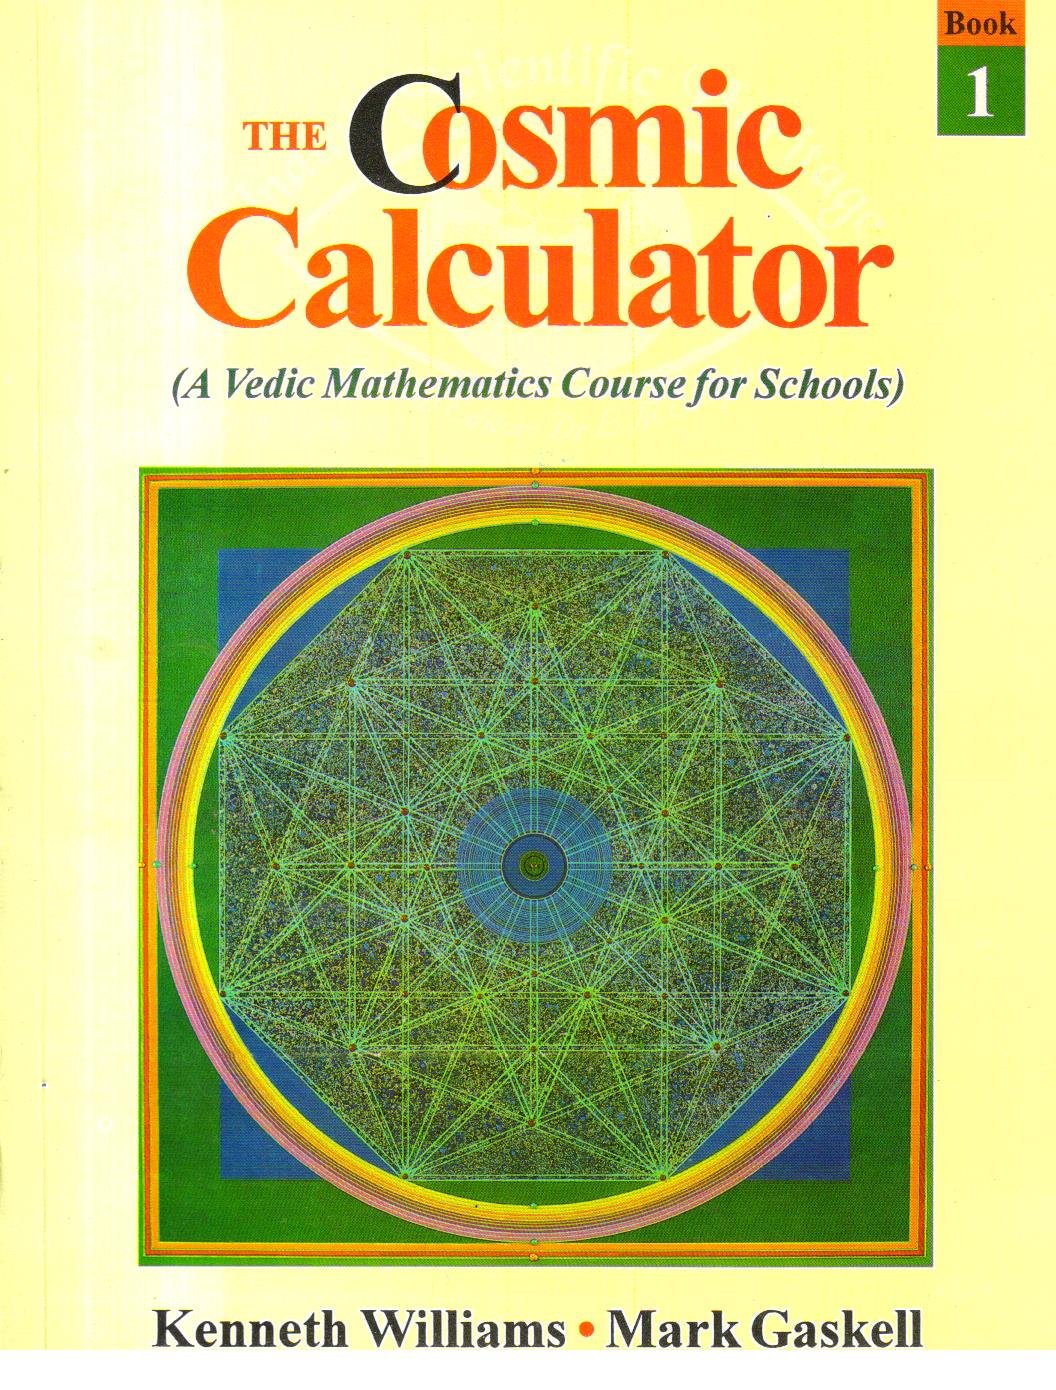 The Cosmic Calculater Book 1.